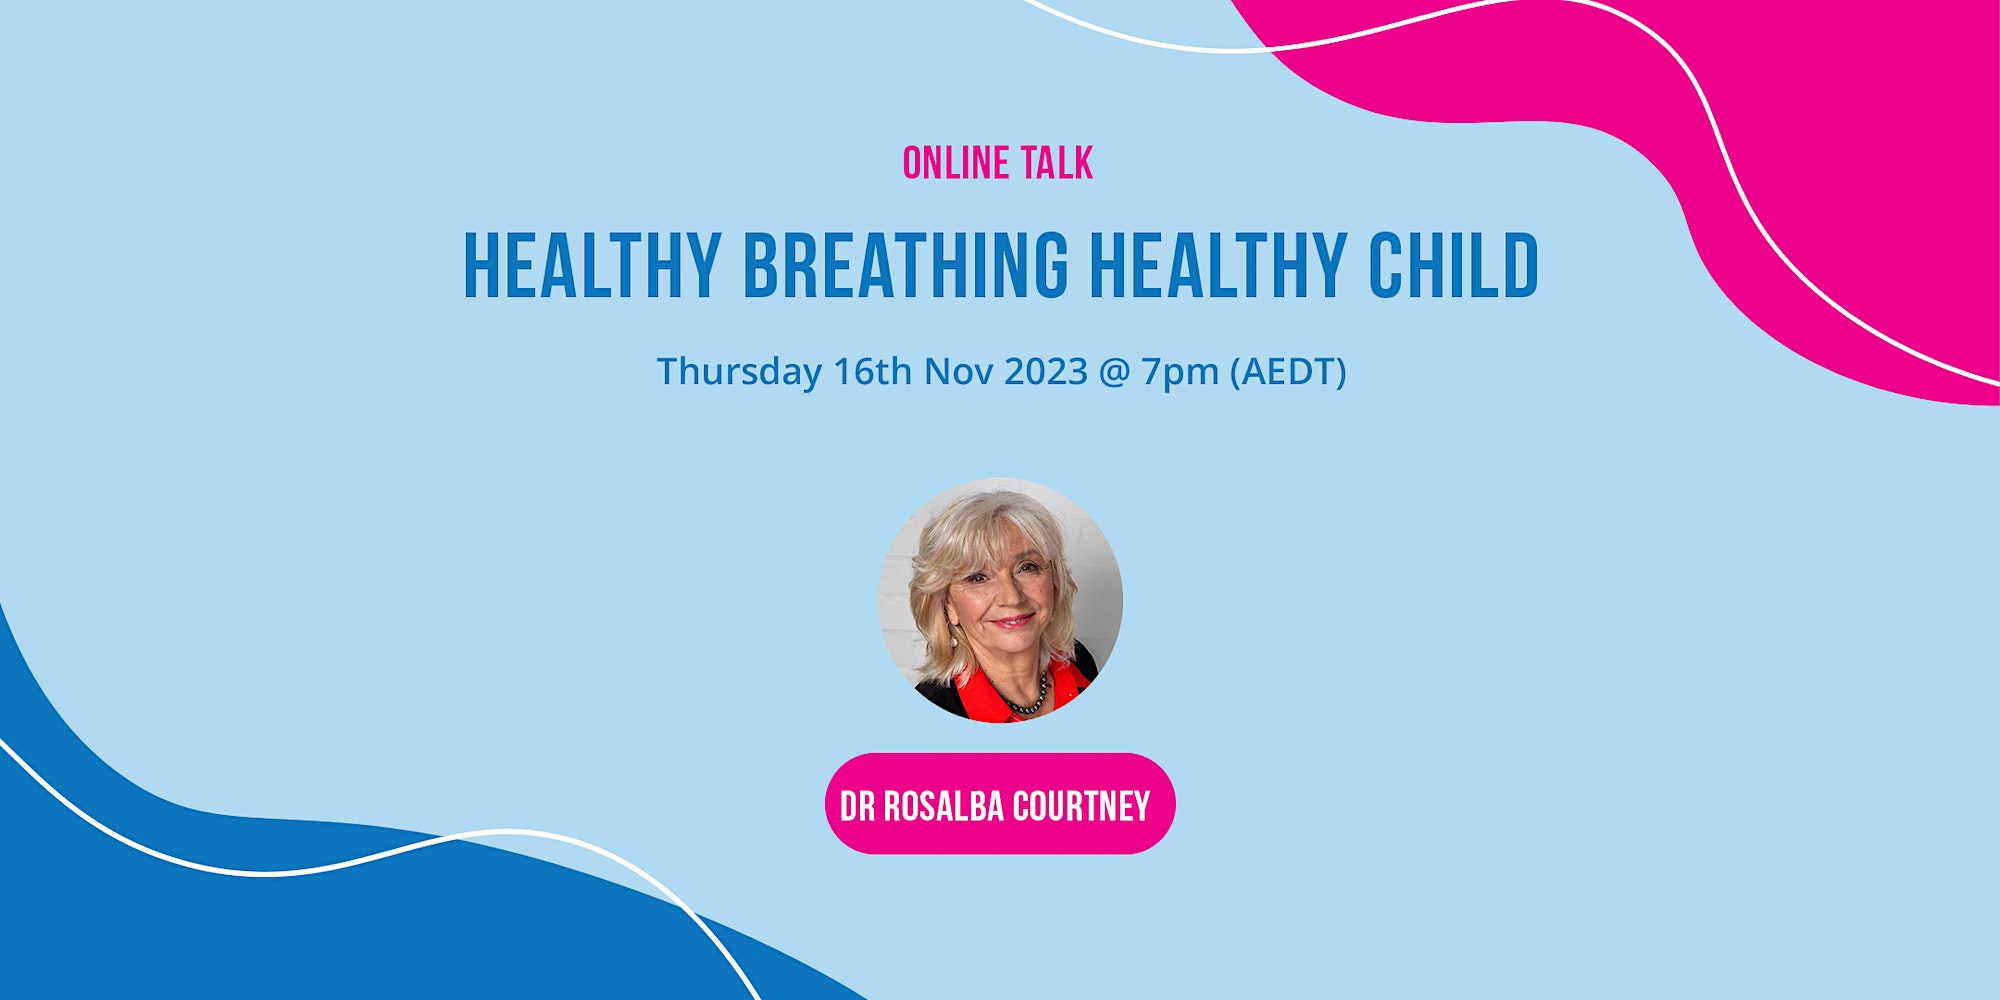 Poster for the online talk - Healthy Breathing Healthy Child by Dr Rosalba Courtney on November 16, 2023 7PM AEDT, Thursday